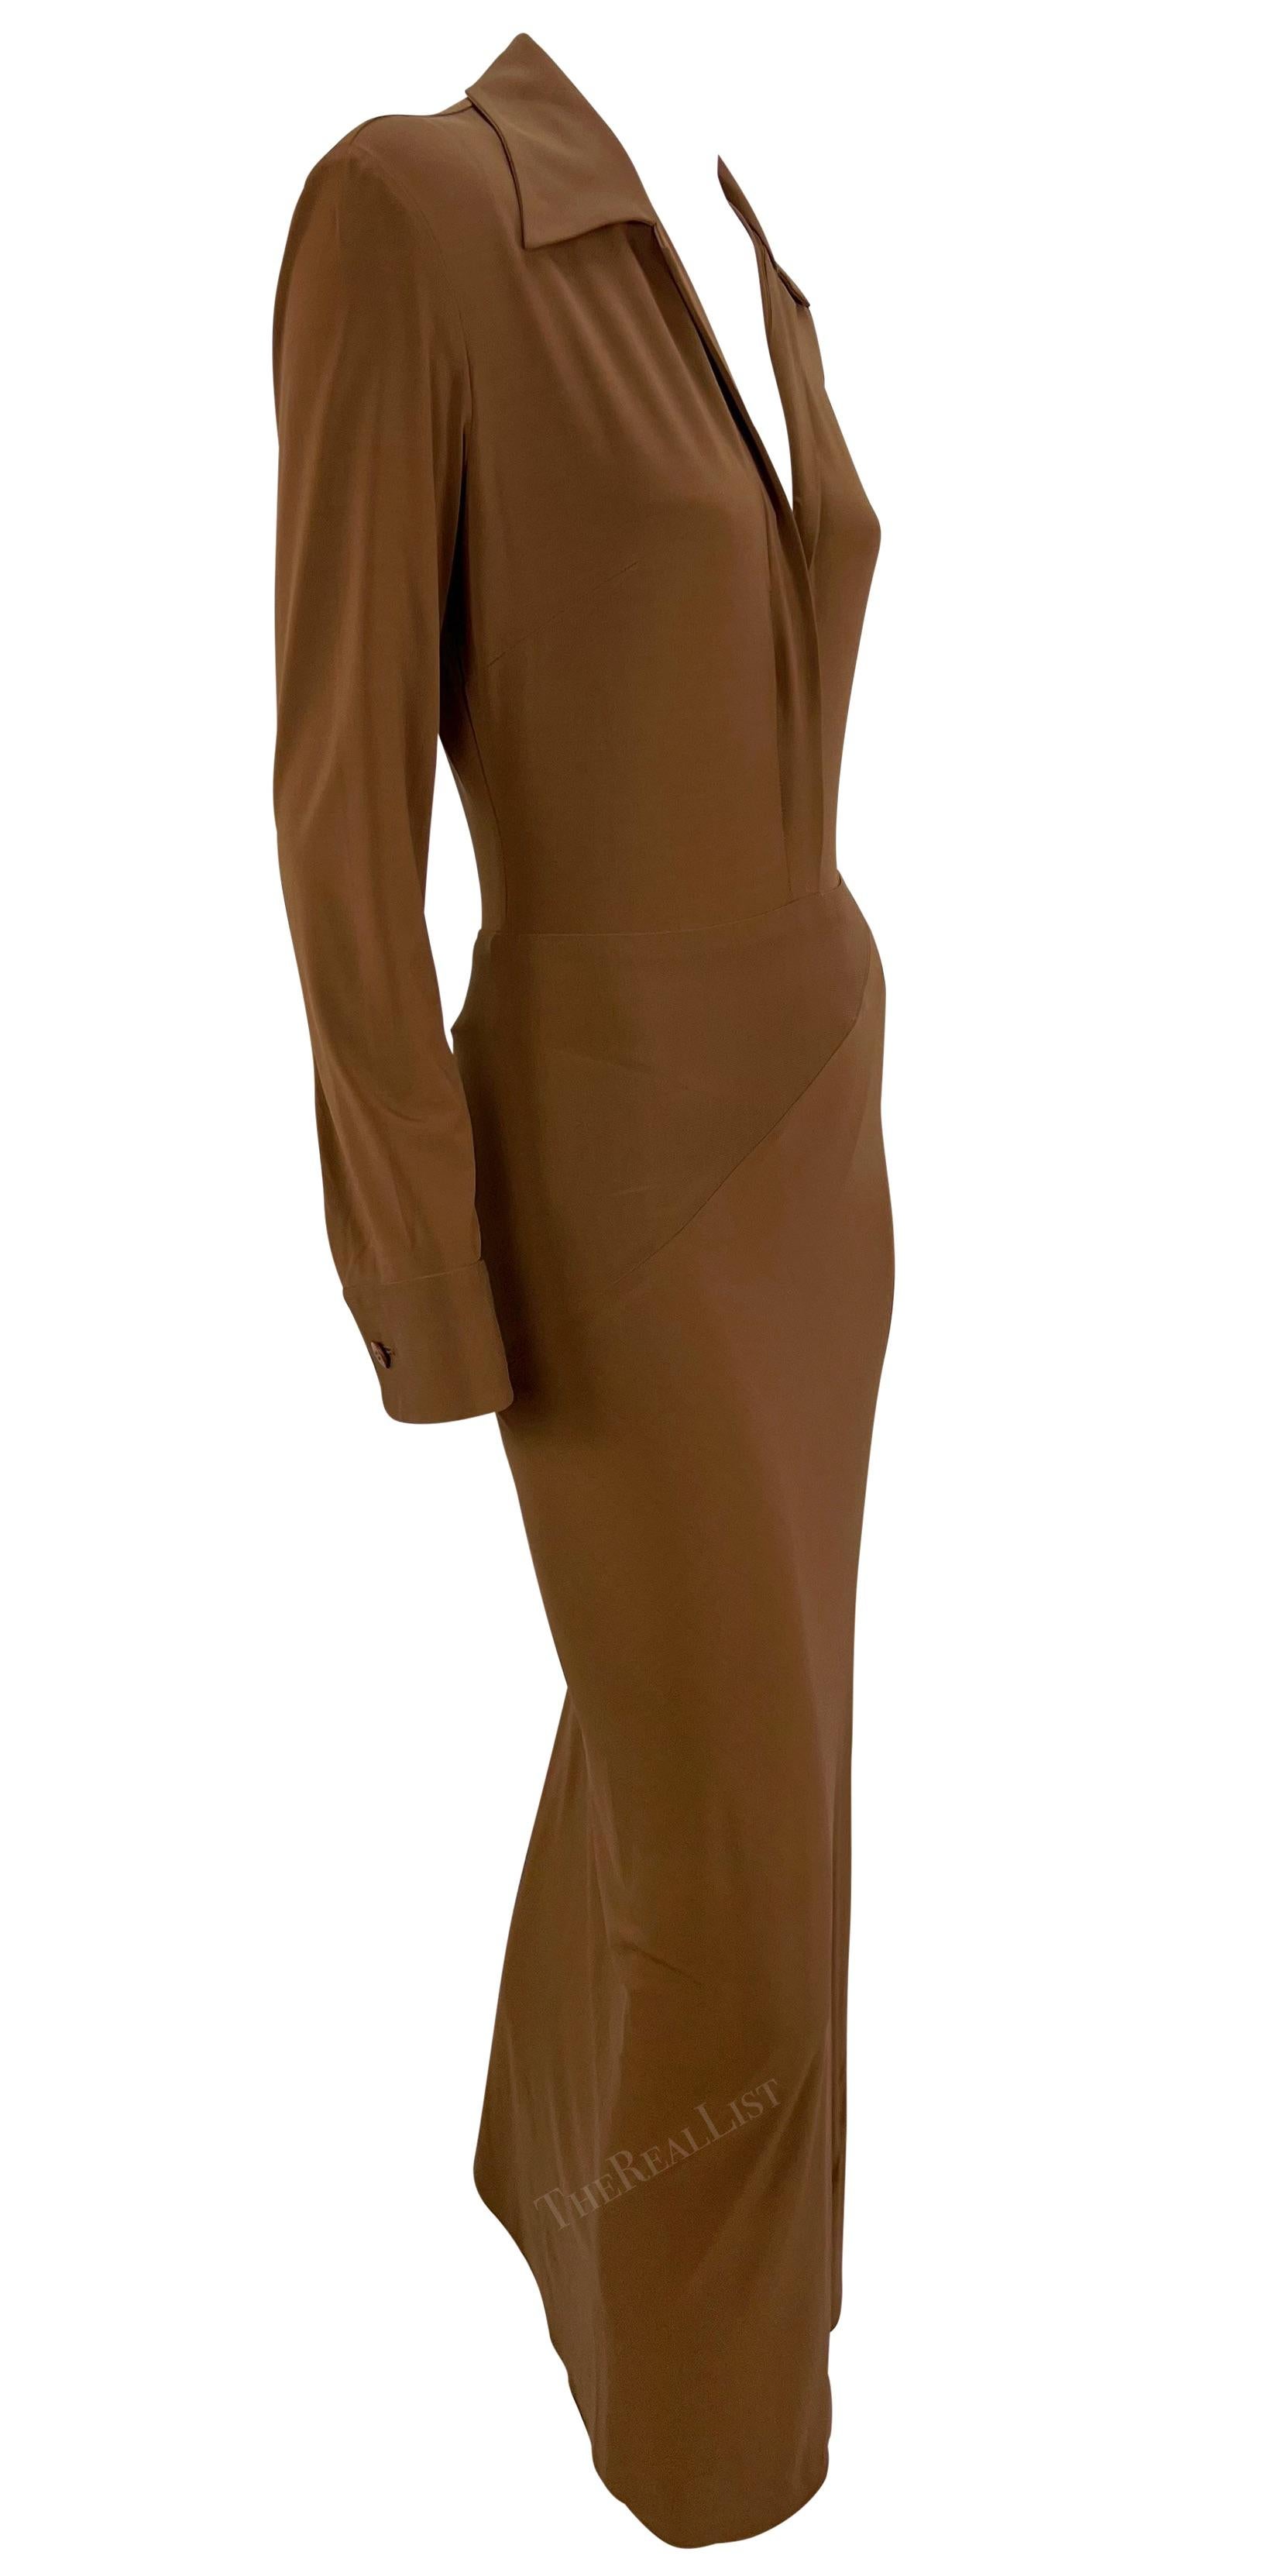 S/S 1996 Donna Karan Runway Light Brown Plunging Bodycon Dress For Sale 3